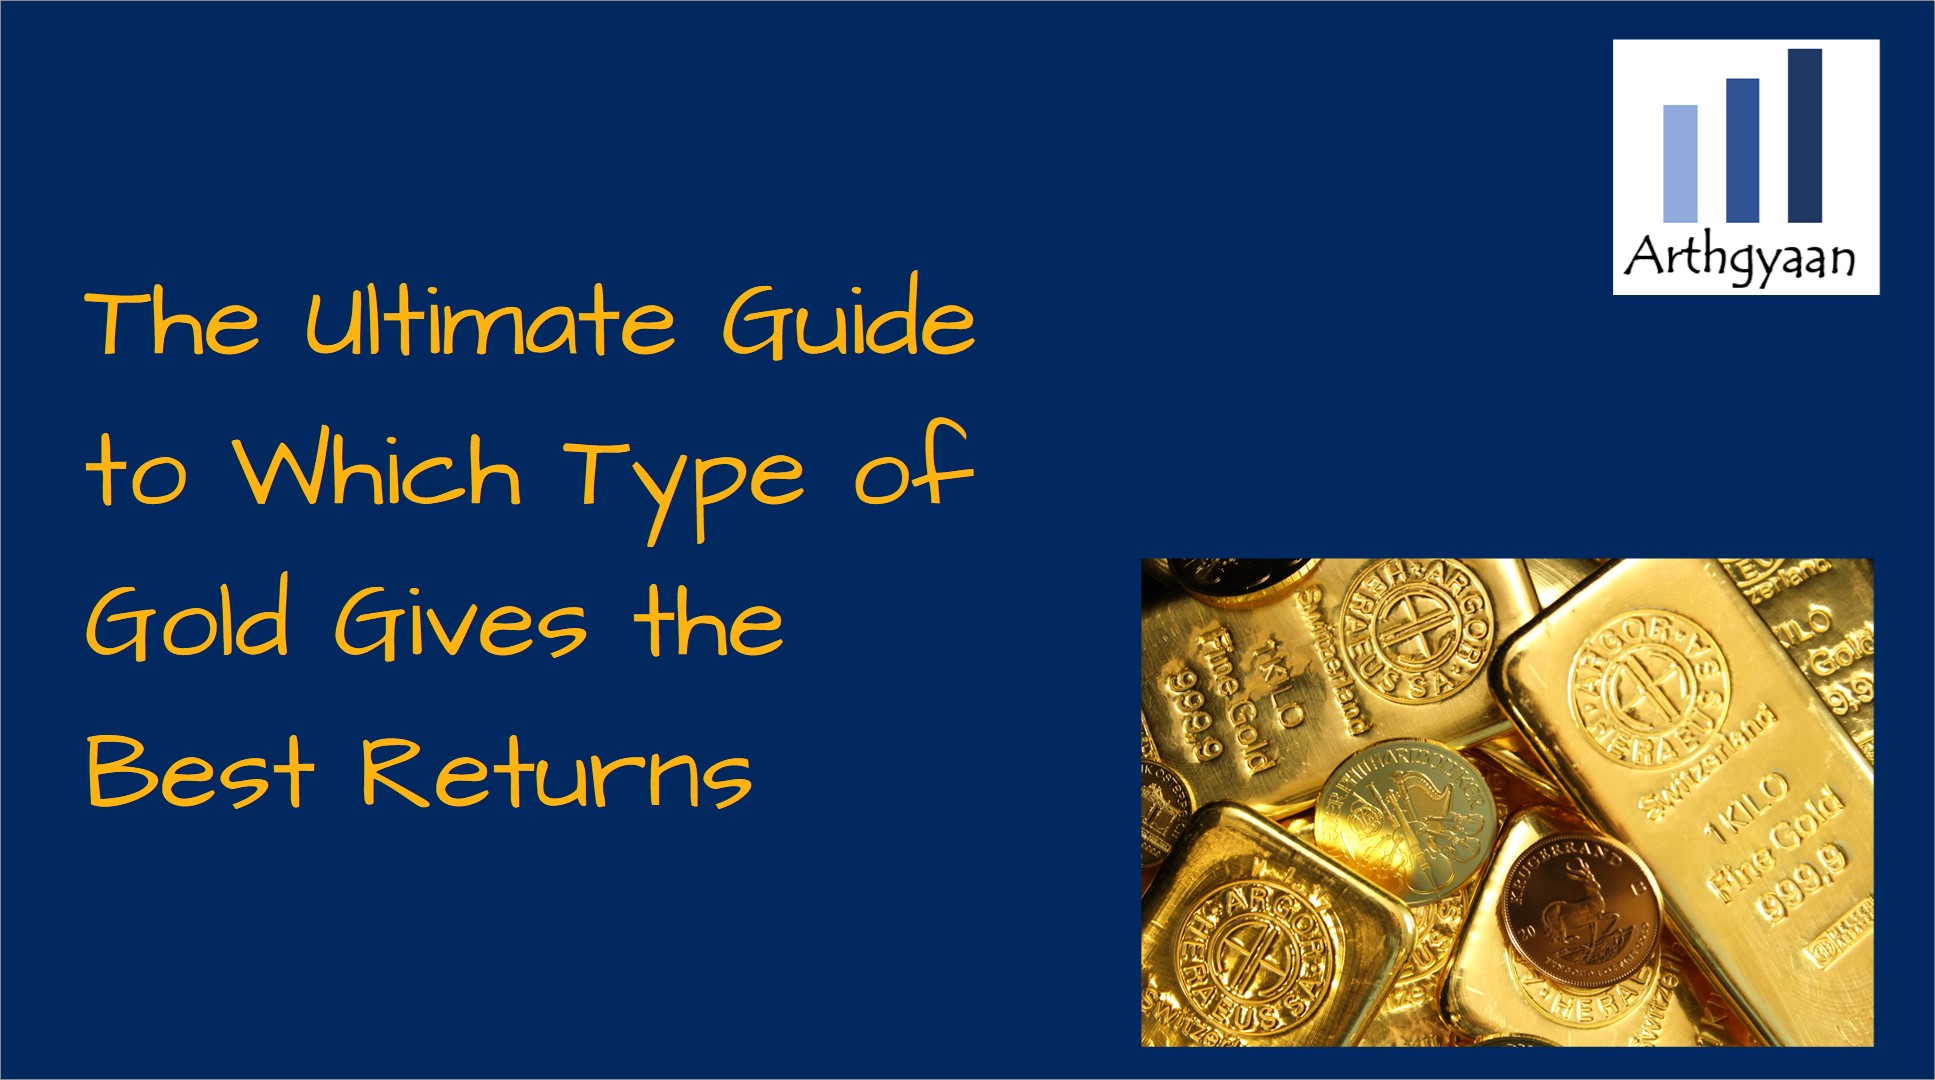 <p>This article helps you choose the right type of gold for your long-term investments since all options do not give the best results.</p>

